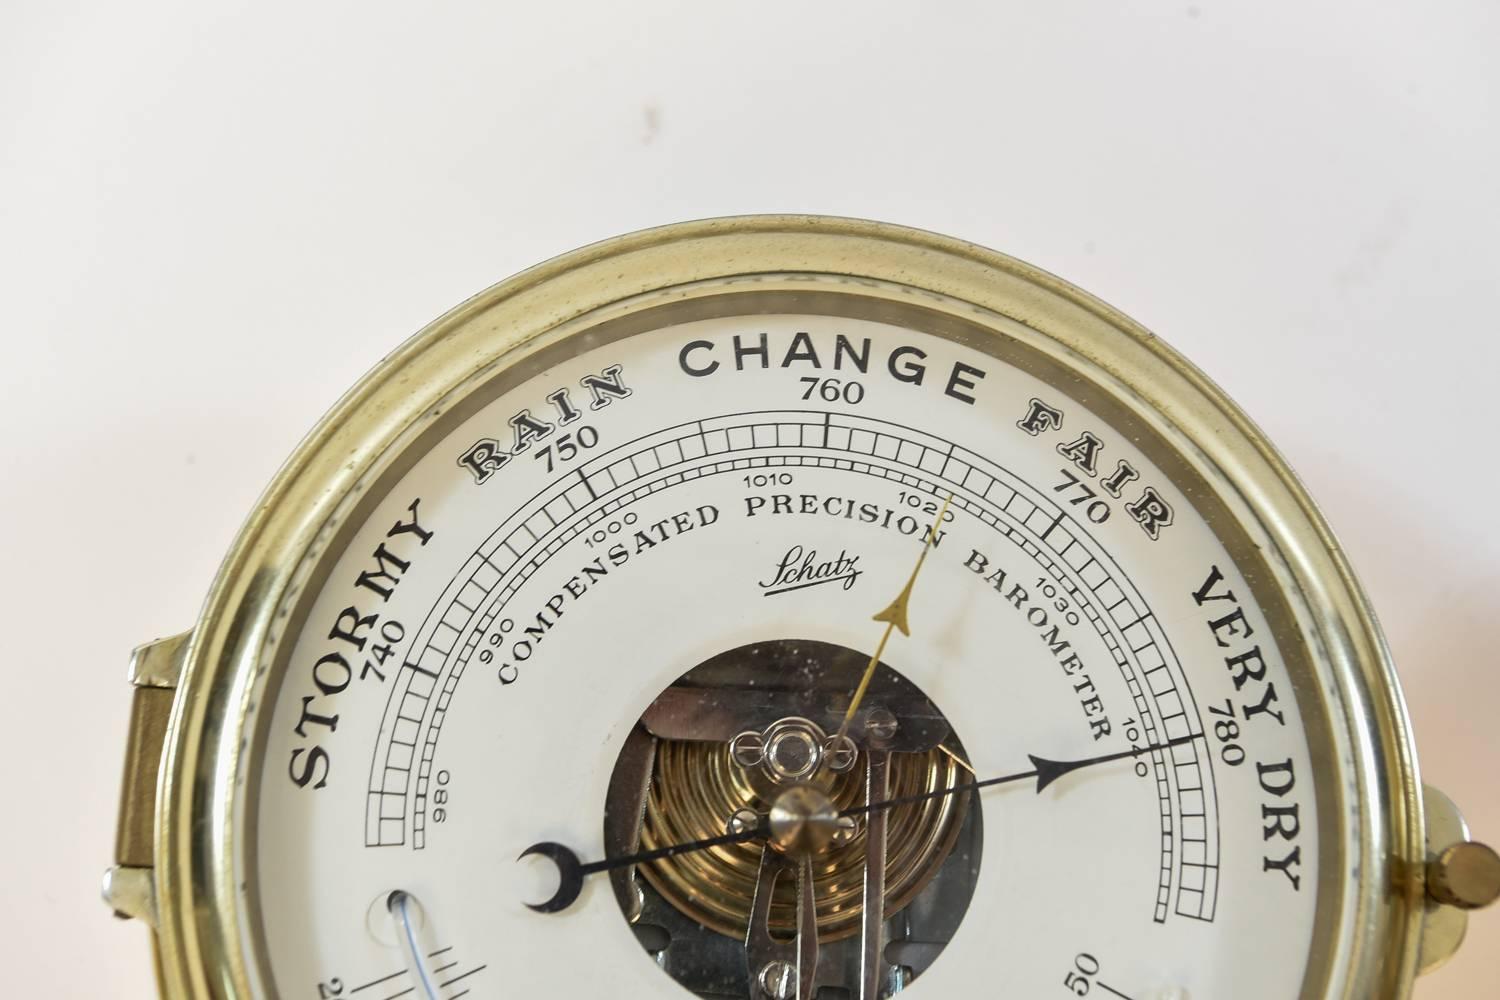 A beautiful ships clock and barometer weather station made by Schatz, the model is the Royal Mariner. The clock mechanism has been changed to battery power so no need to wind anymore, and the barometer indicates the accurate pressure.